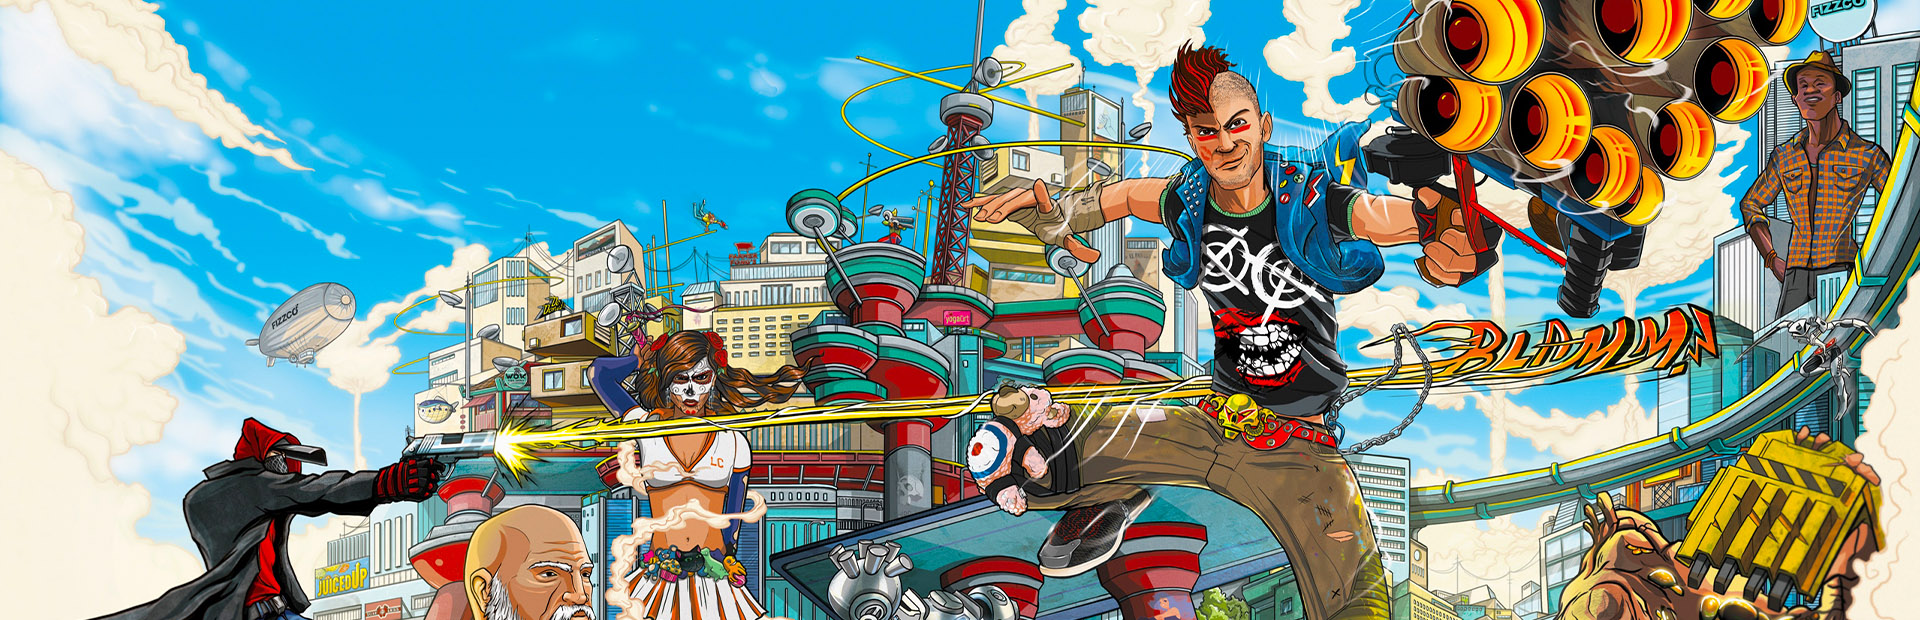 Logo for Sunset Overdrive by PedroV